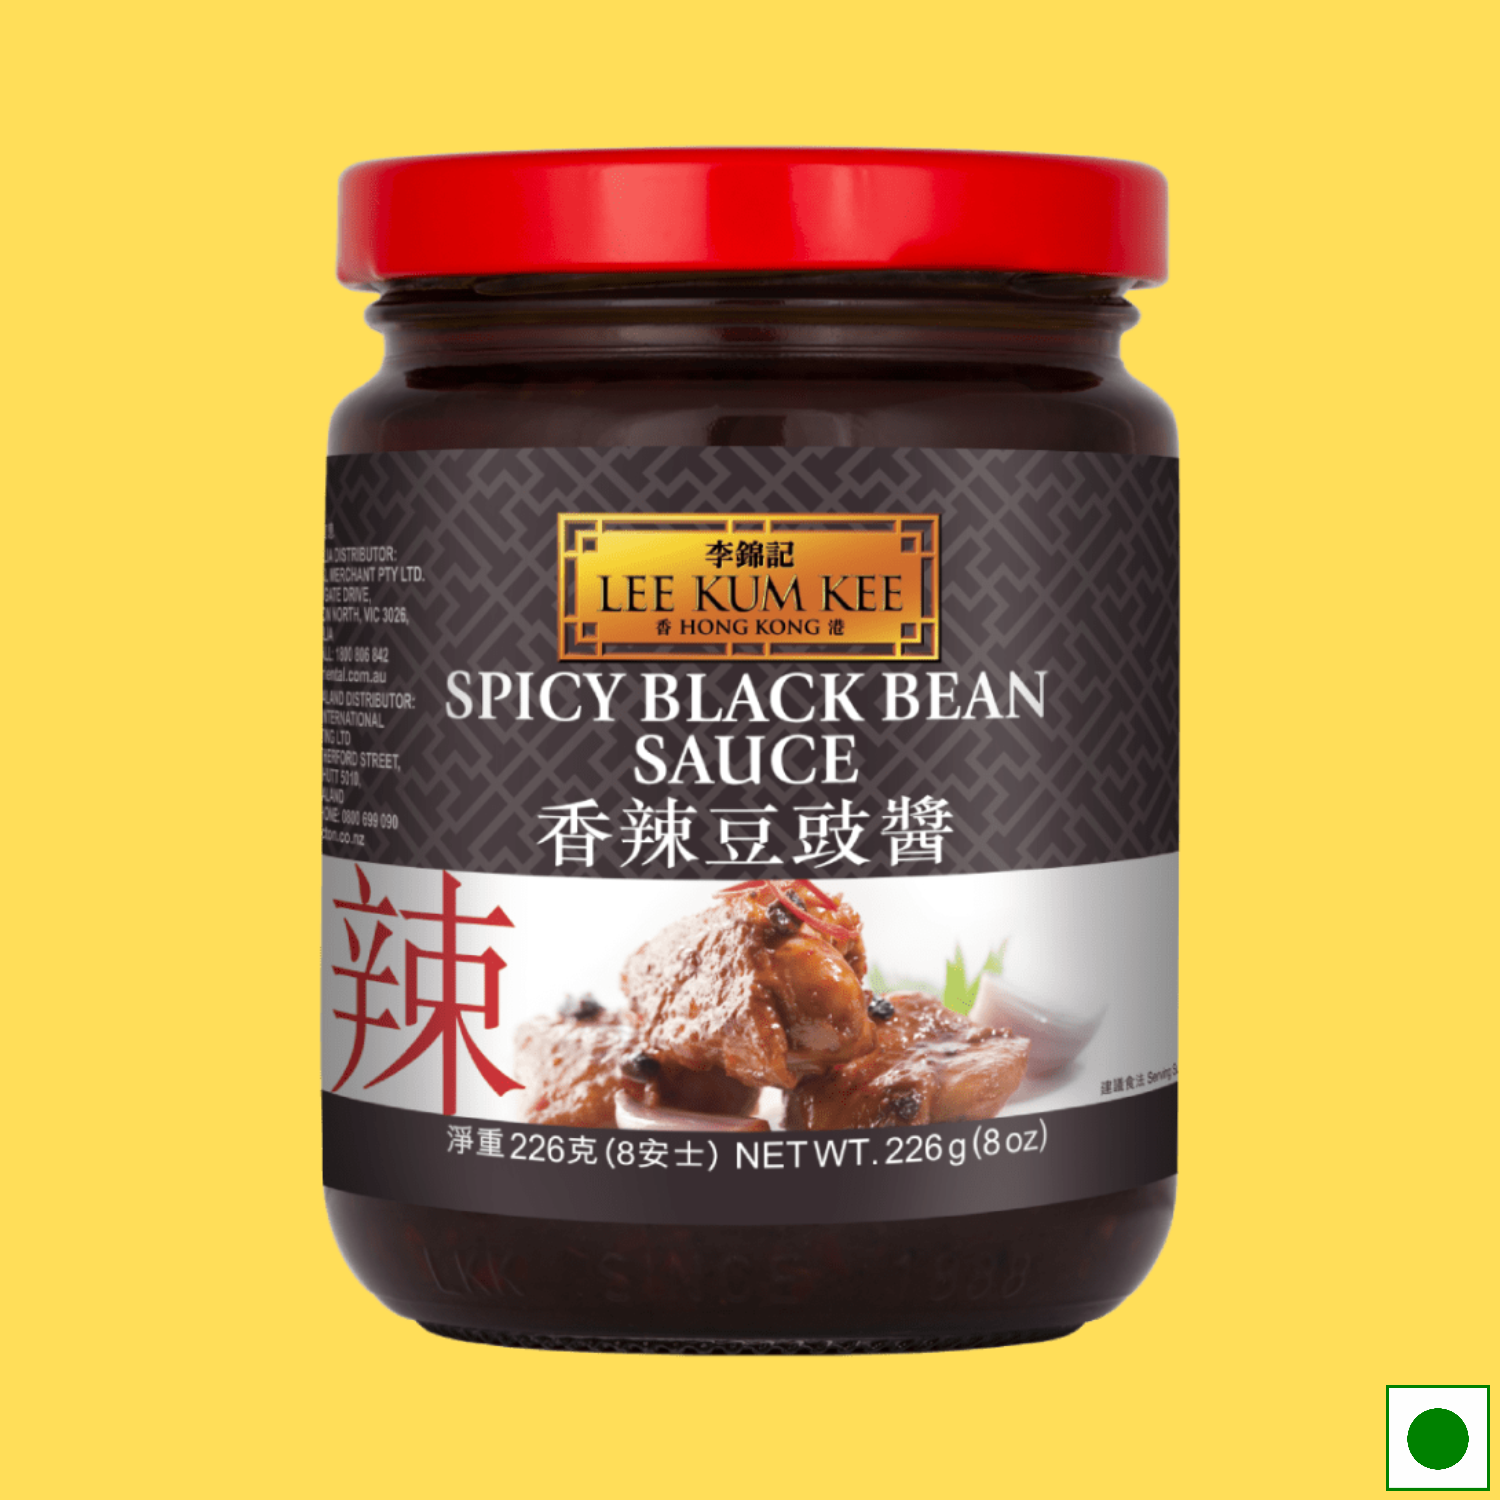 Lee Kum Kee Spicy Black Bean Sauce, 226g (Imported)